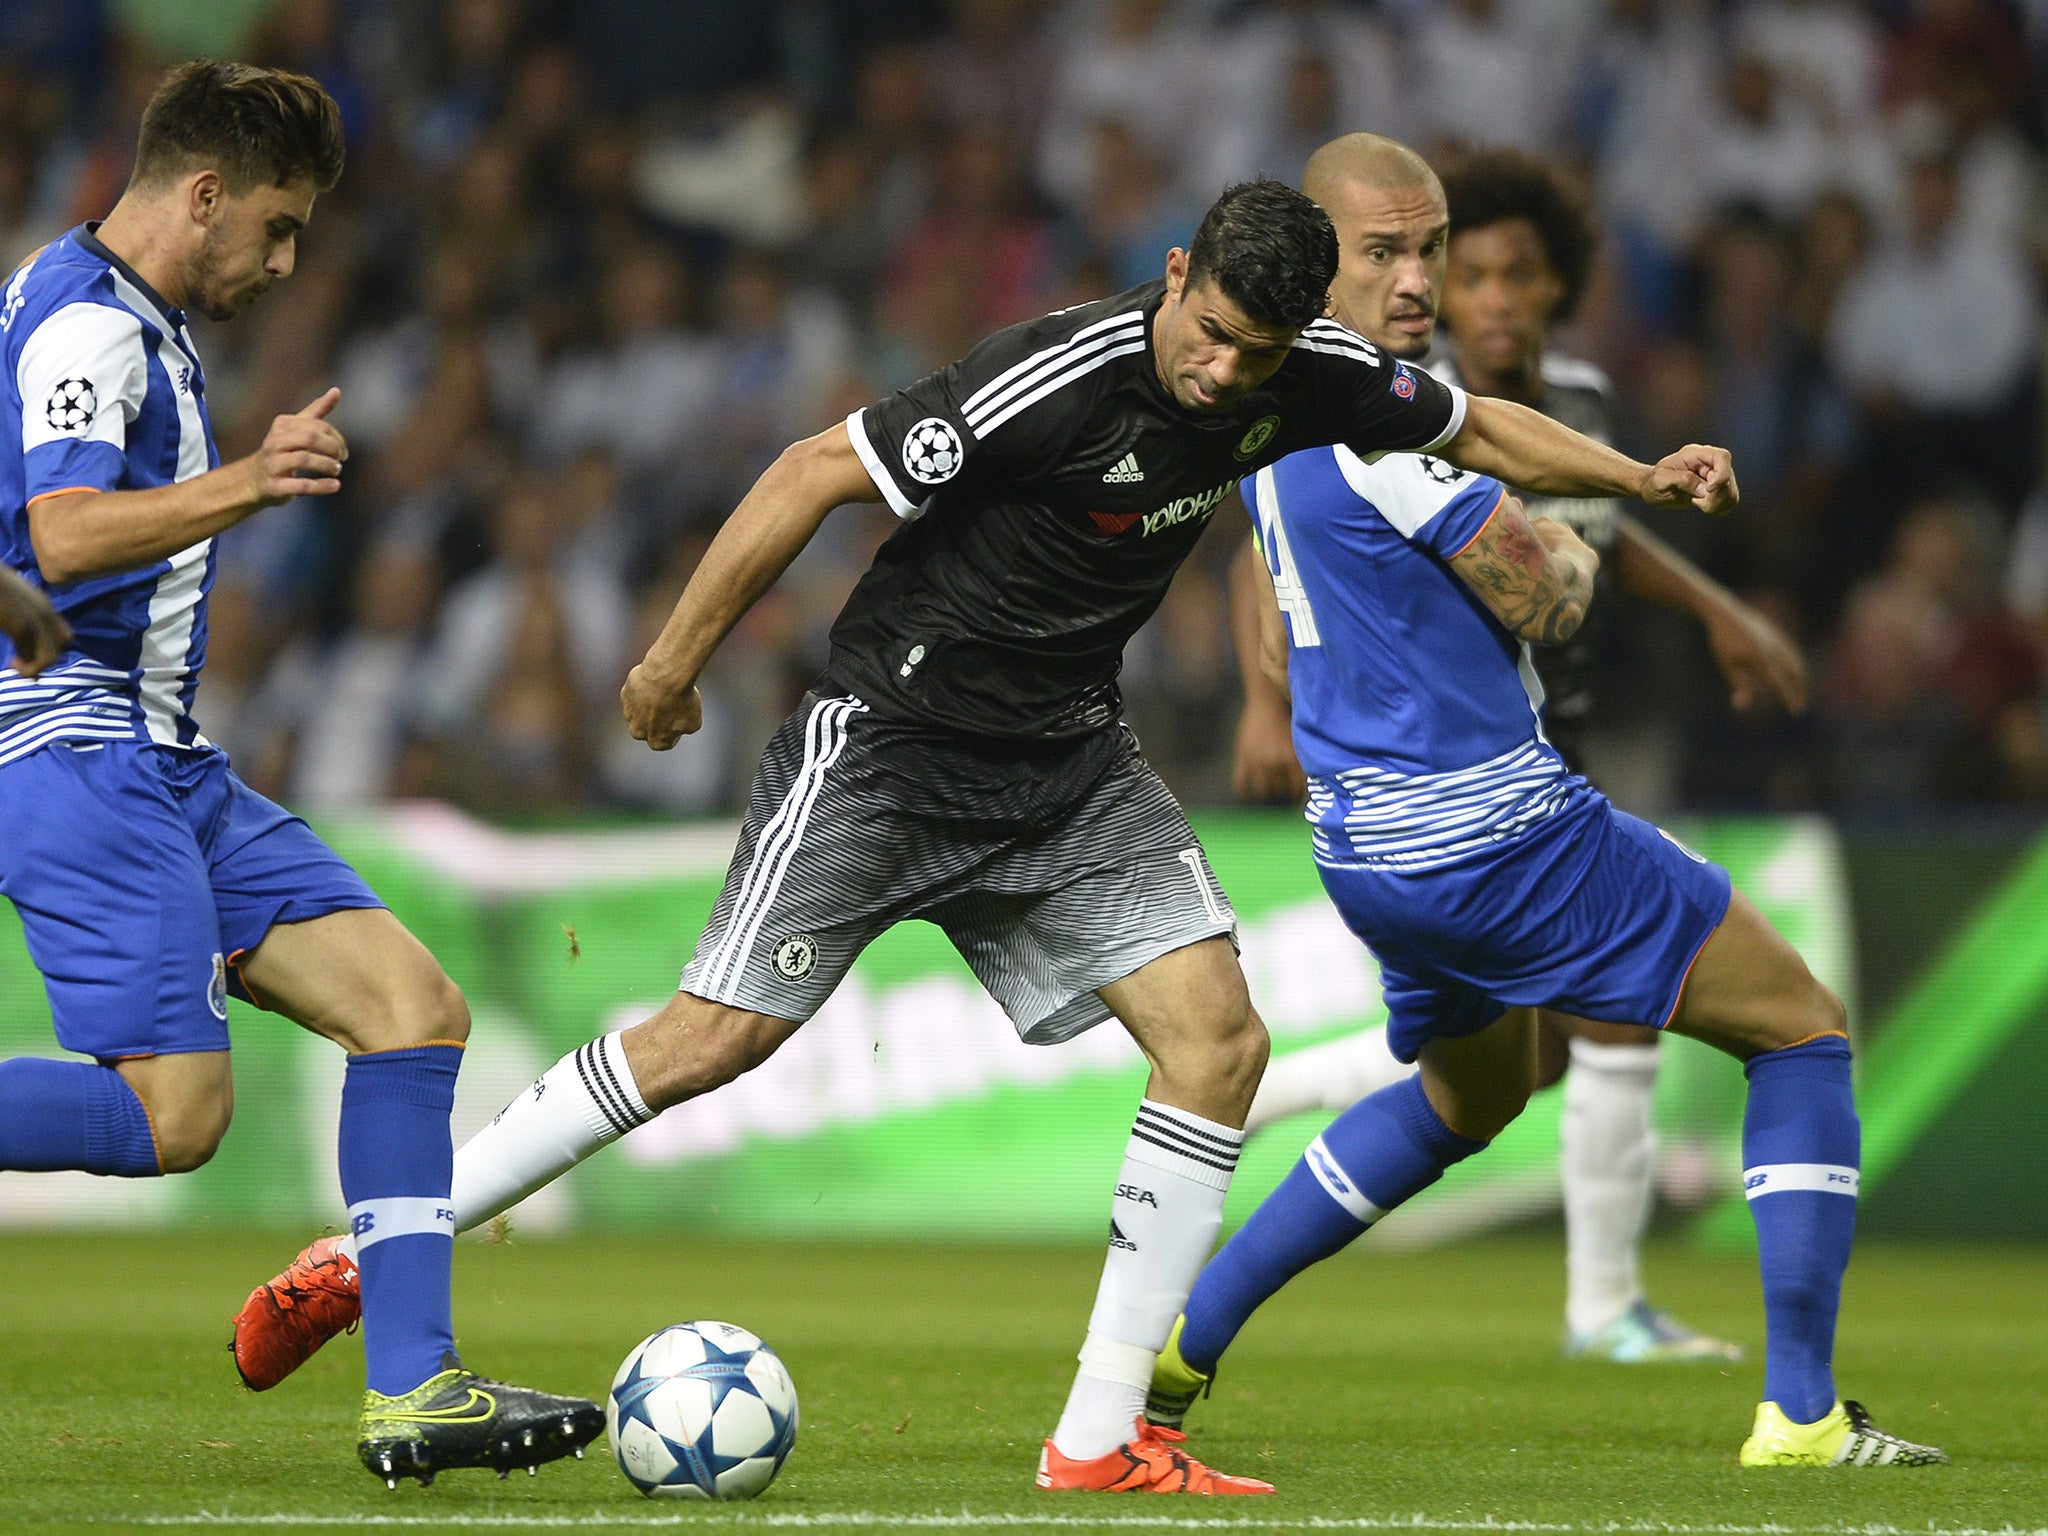 Diego Costa jostles for the ball with Ruben Neves and Maicon